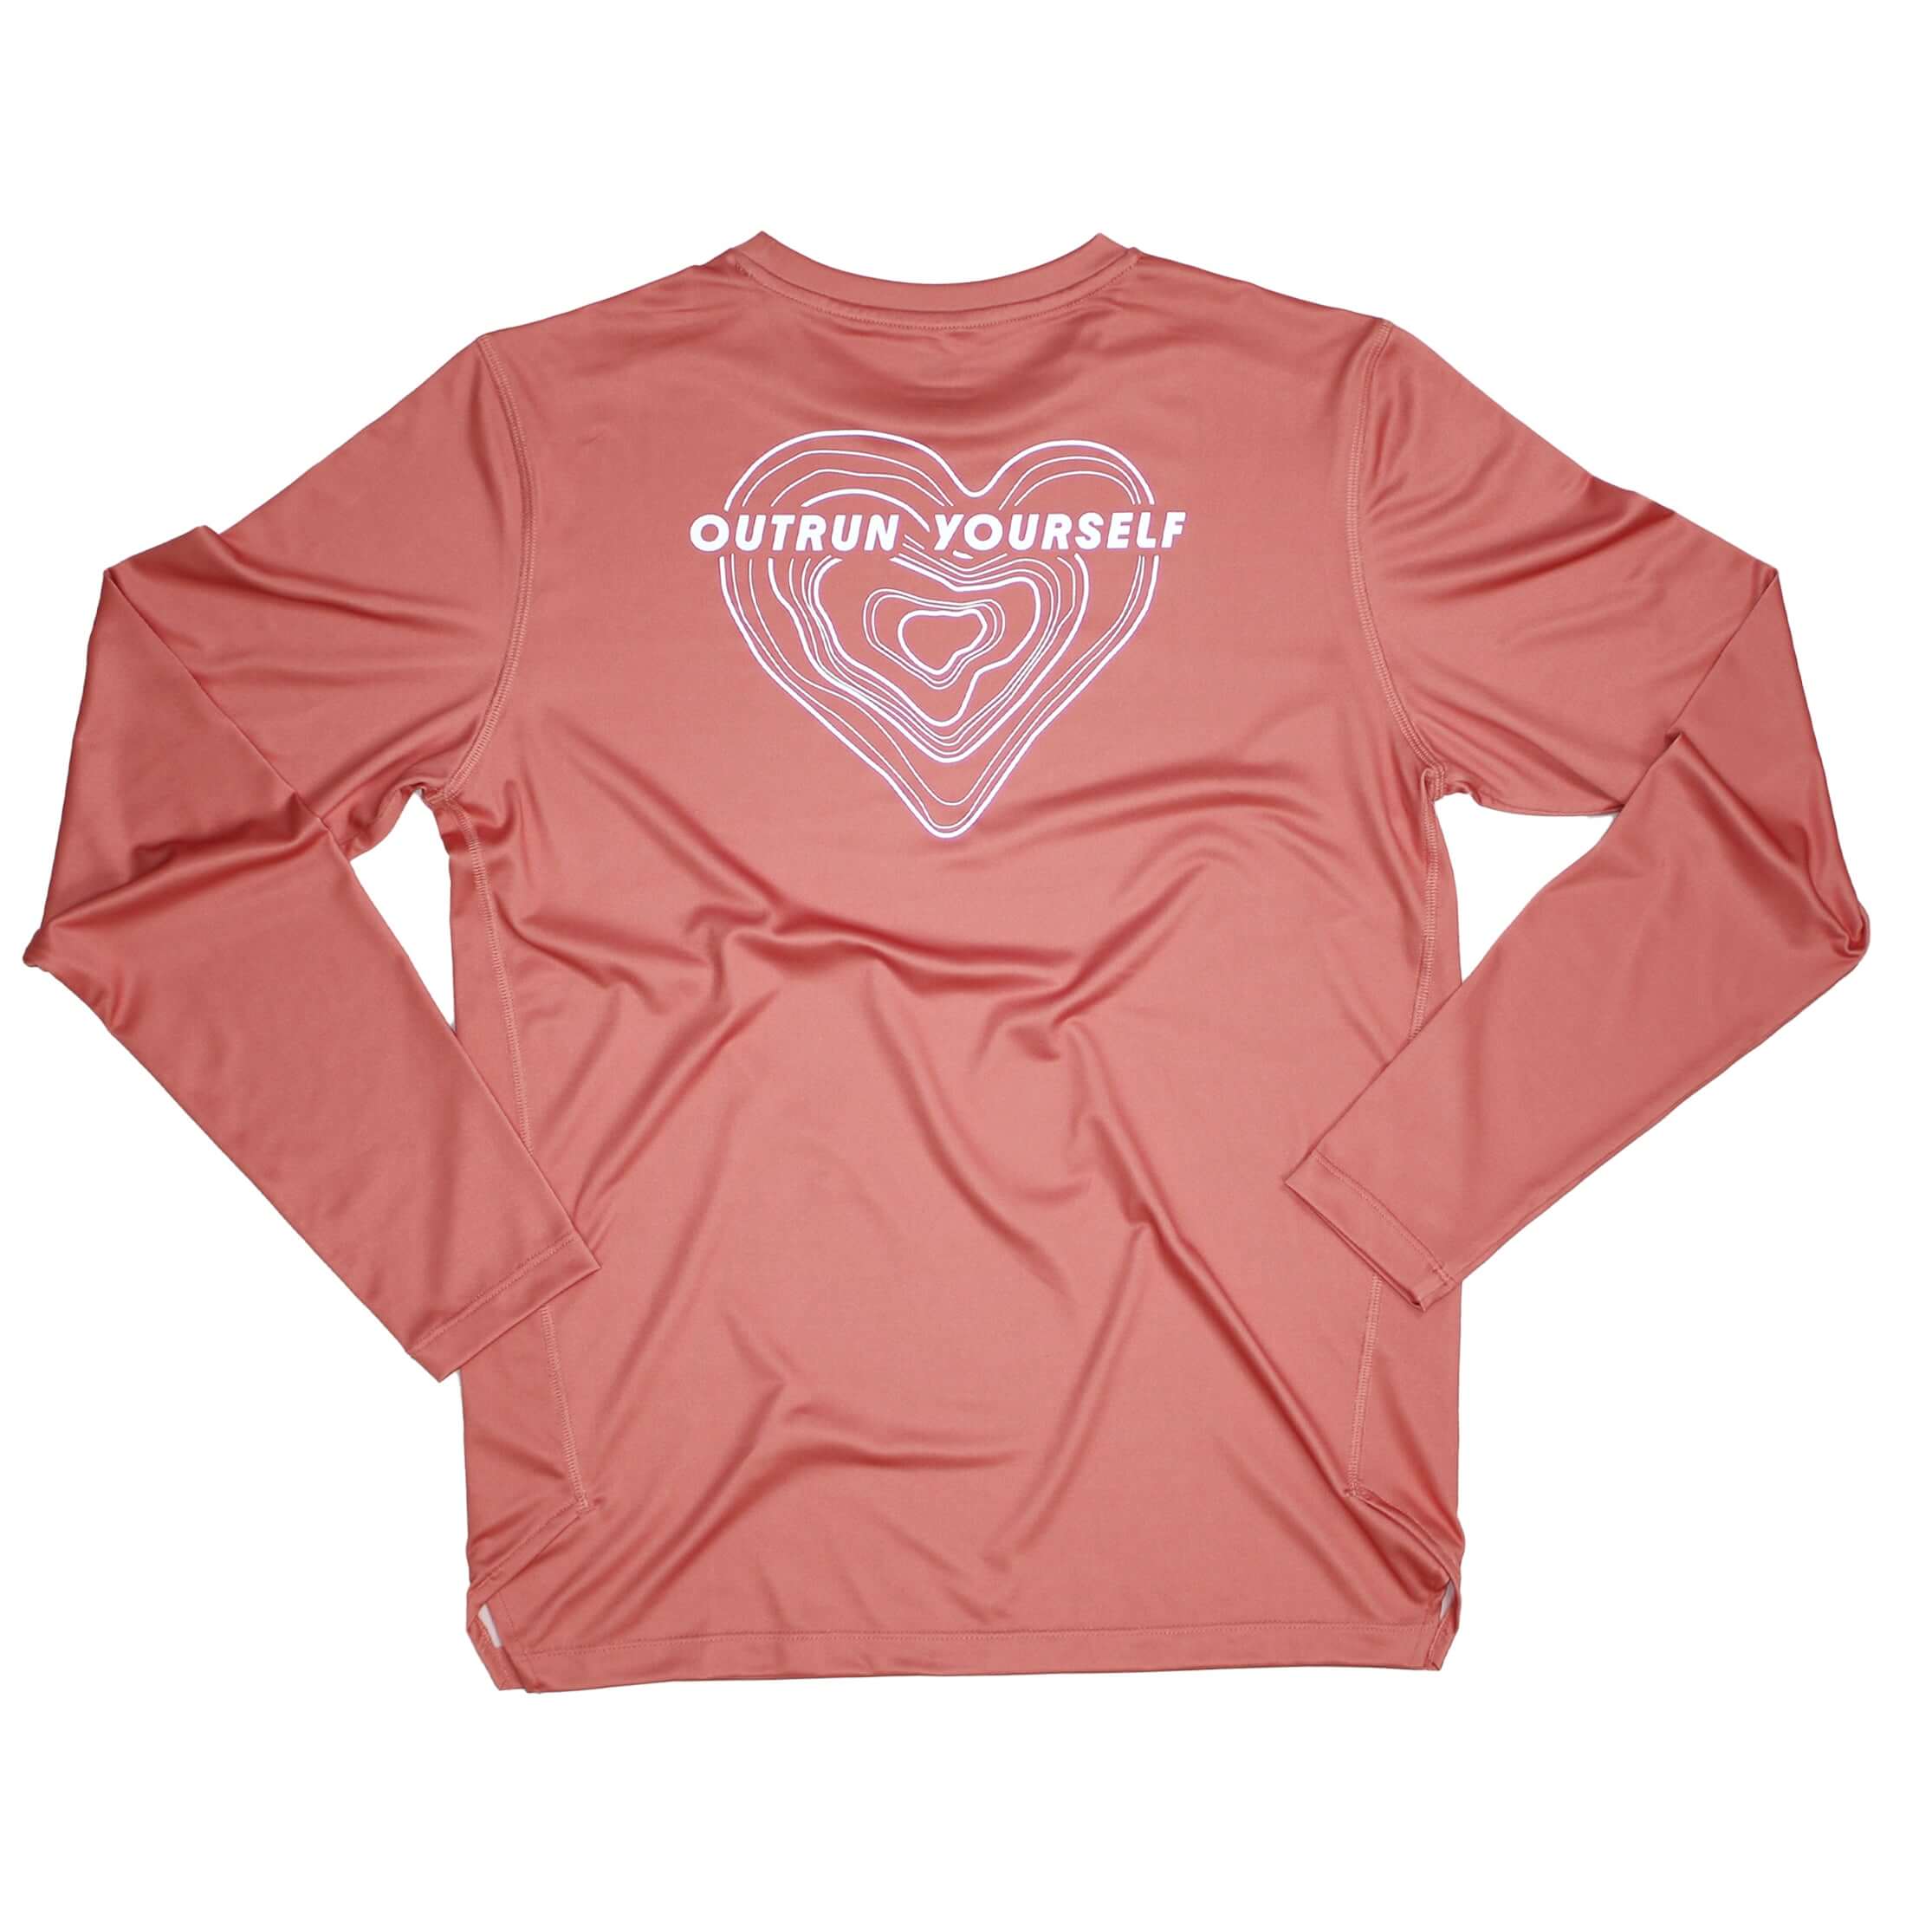 Running Longsleeve for training or racing in cold condition. Lightweight and moisture-wicking made from Recycling Polyester.